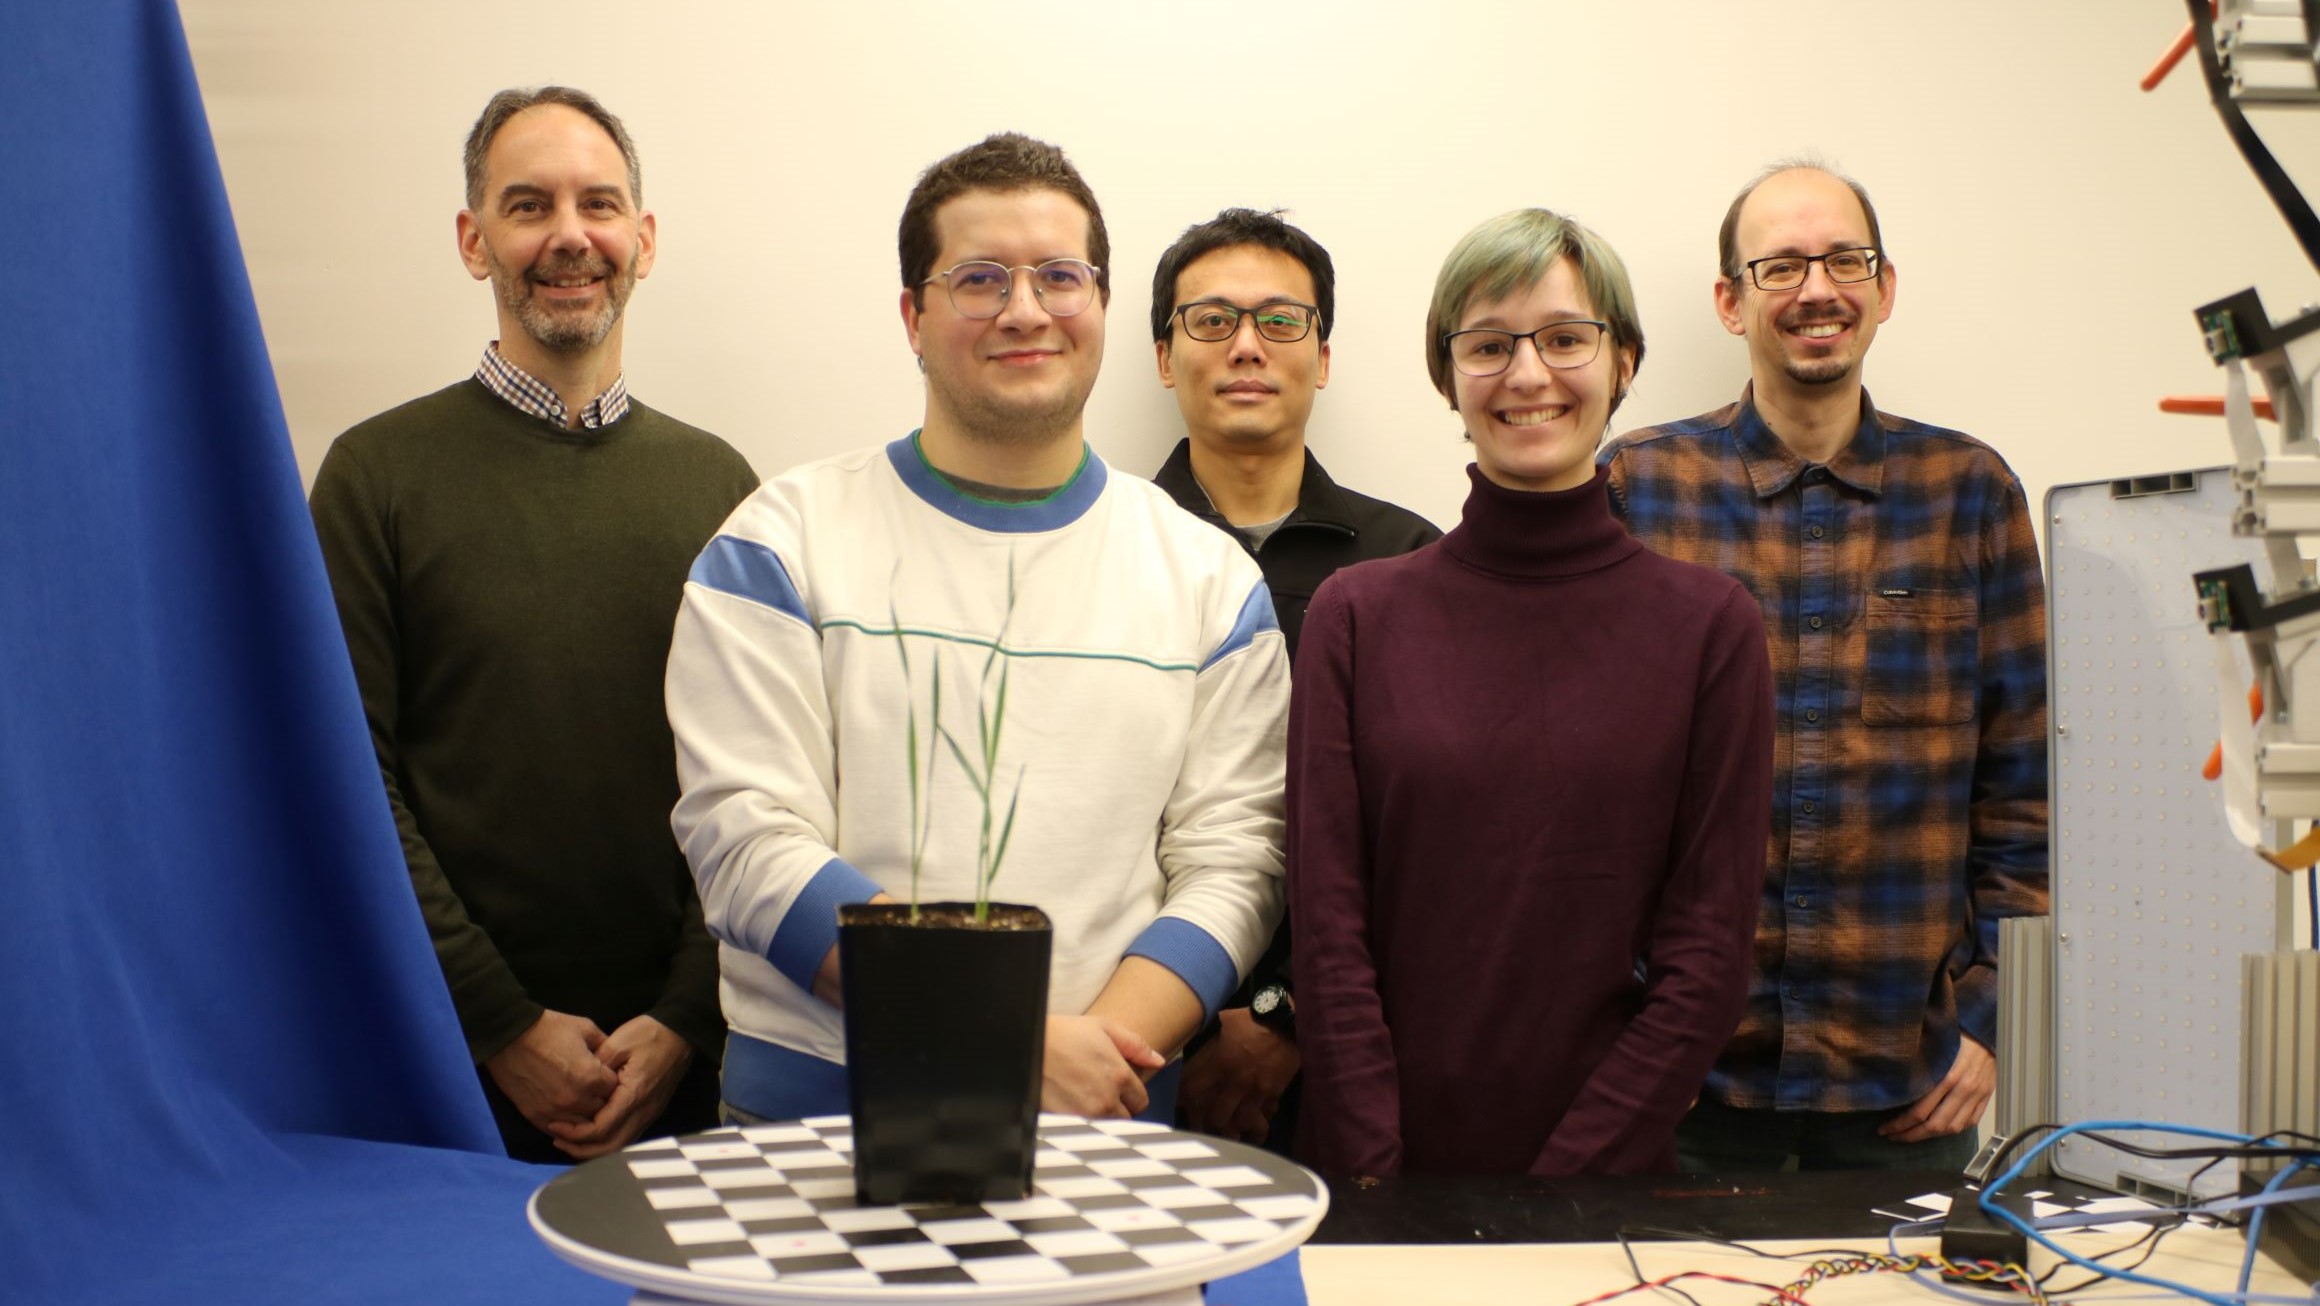 Dr. Christopher Bidinosti, Joe Hrzich, Chen-Yi Liu, Laura Didyk, and Dr. Michael Beck pose for a photo together in the TerraByte research lab.